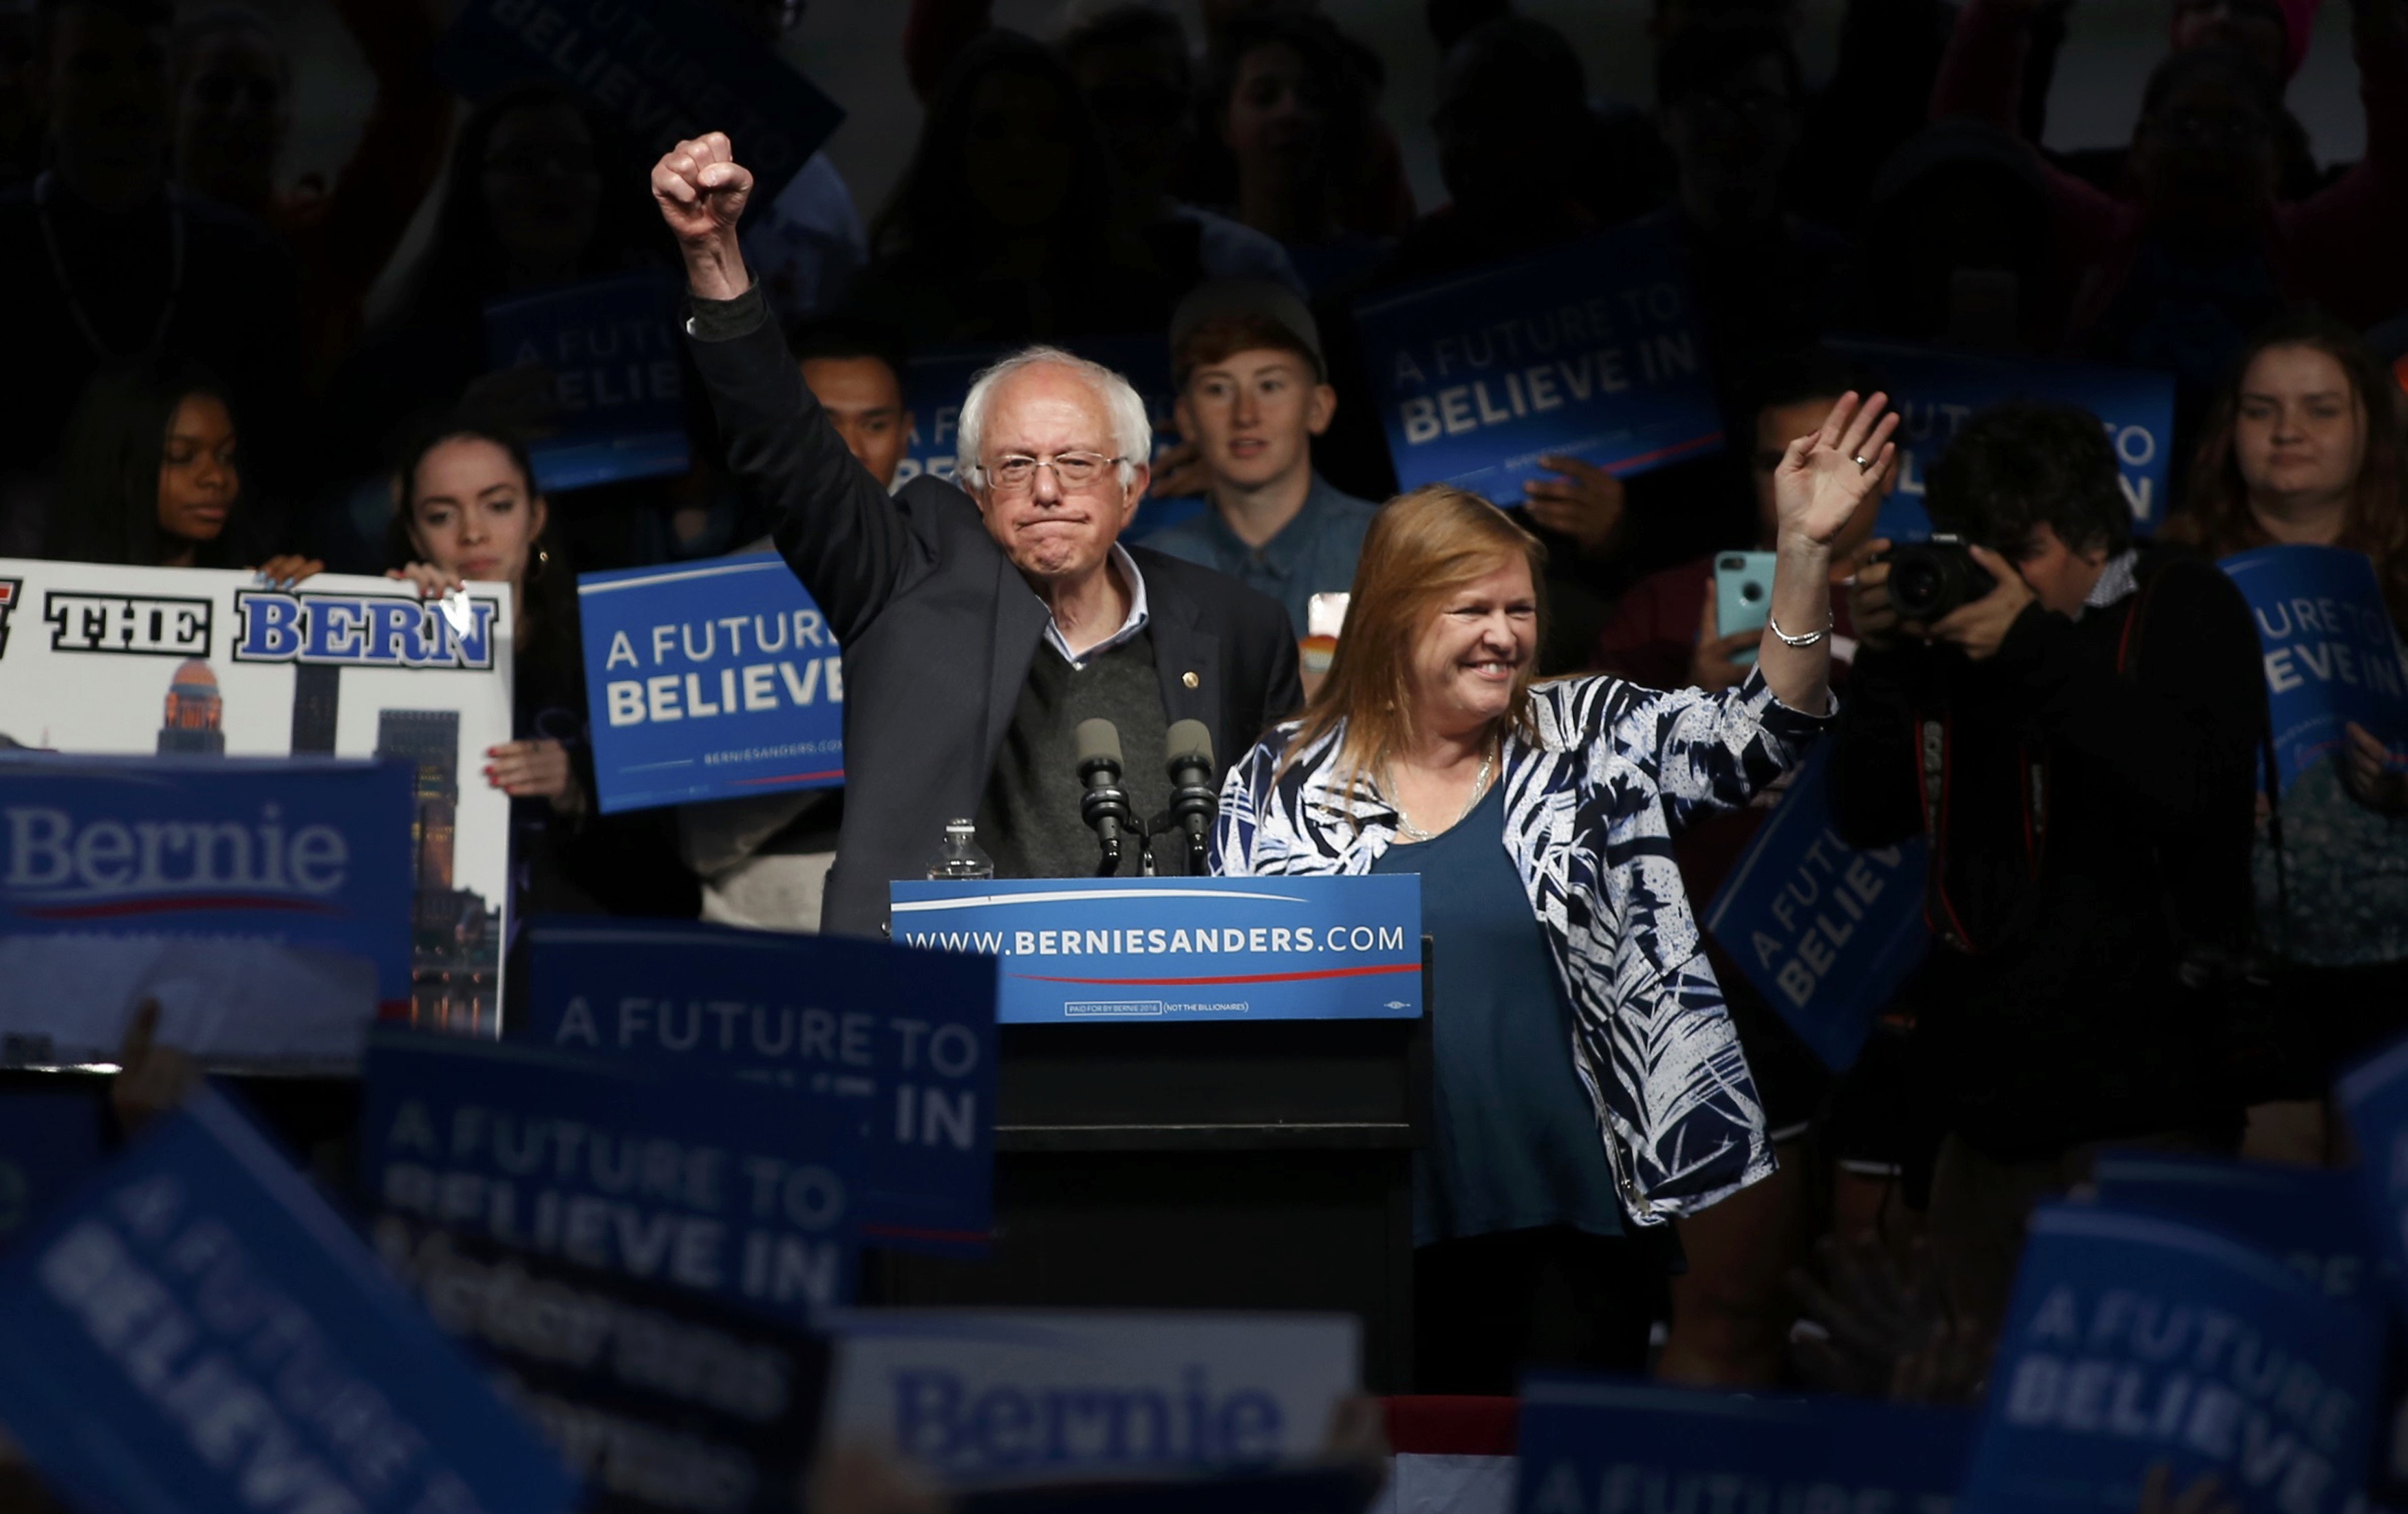 Bernie Sanders and his wife Jane at a campaign event held during Indiana primary day on Tuesday, May 3, 2016.